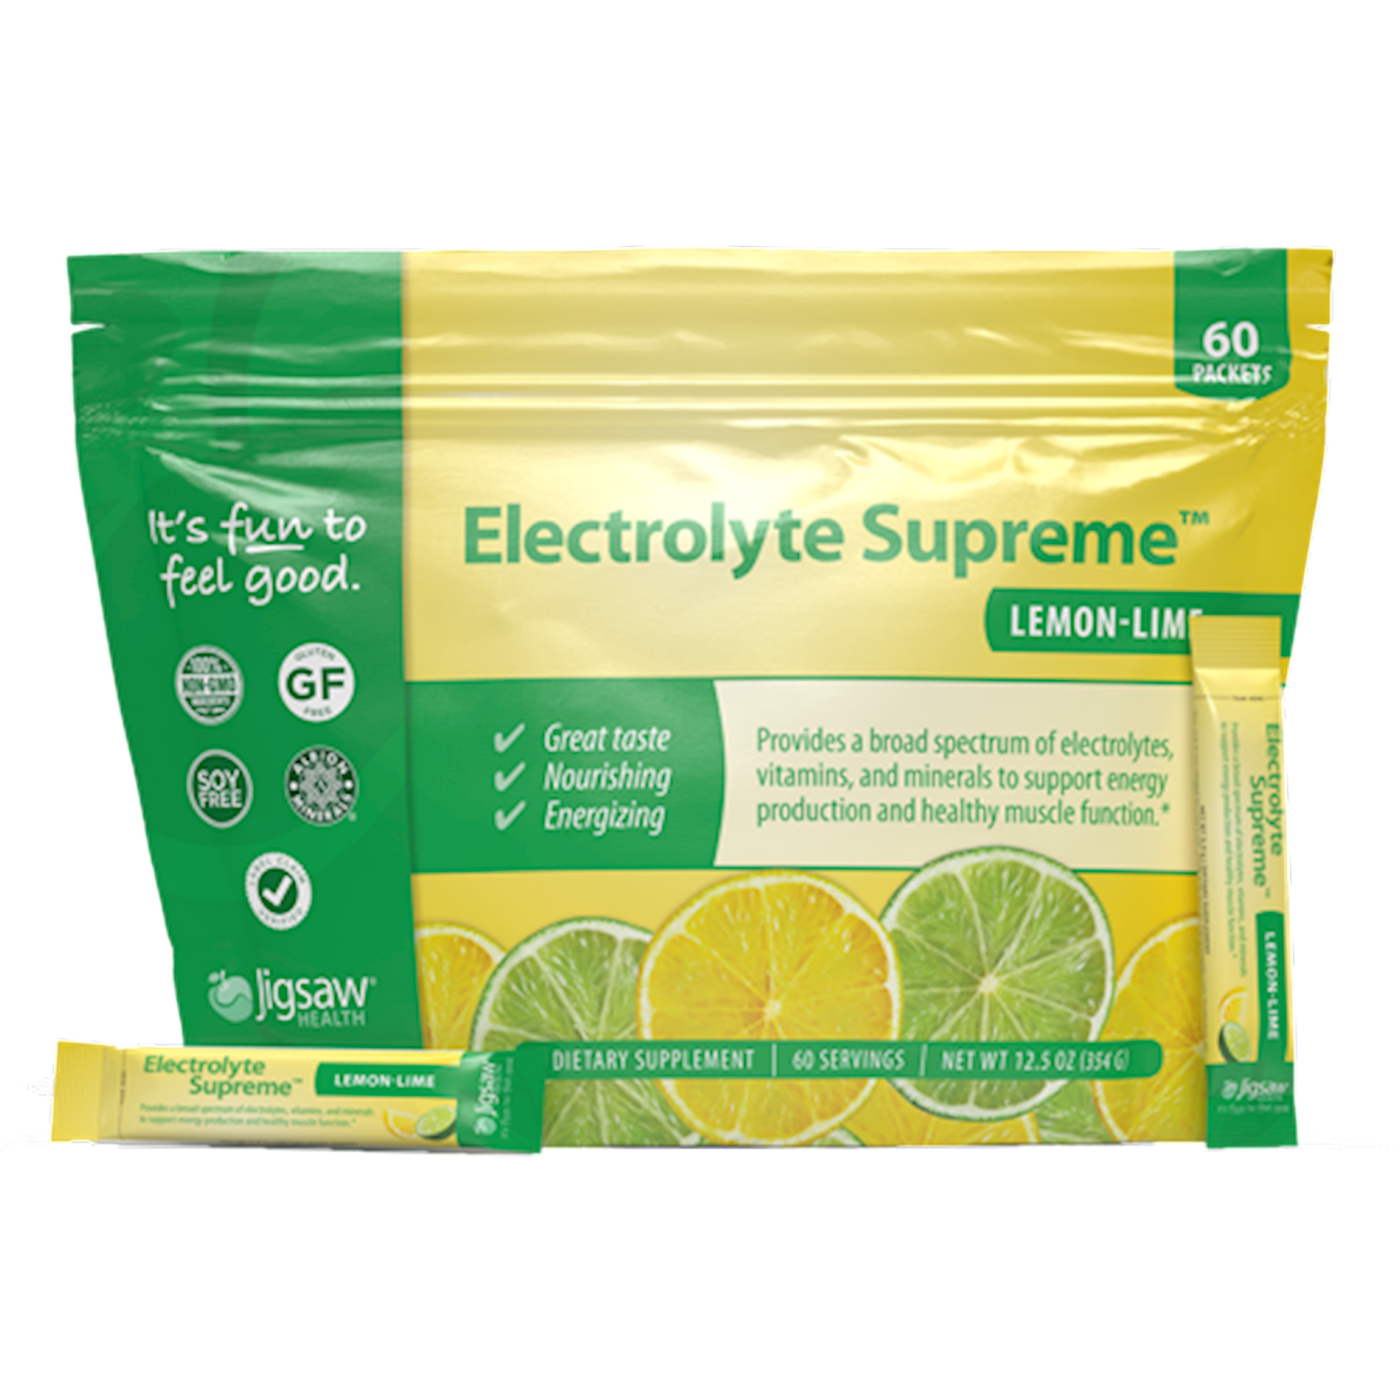 Elect Sup Lemon Lime Packets 60 pckets Curated Wellness